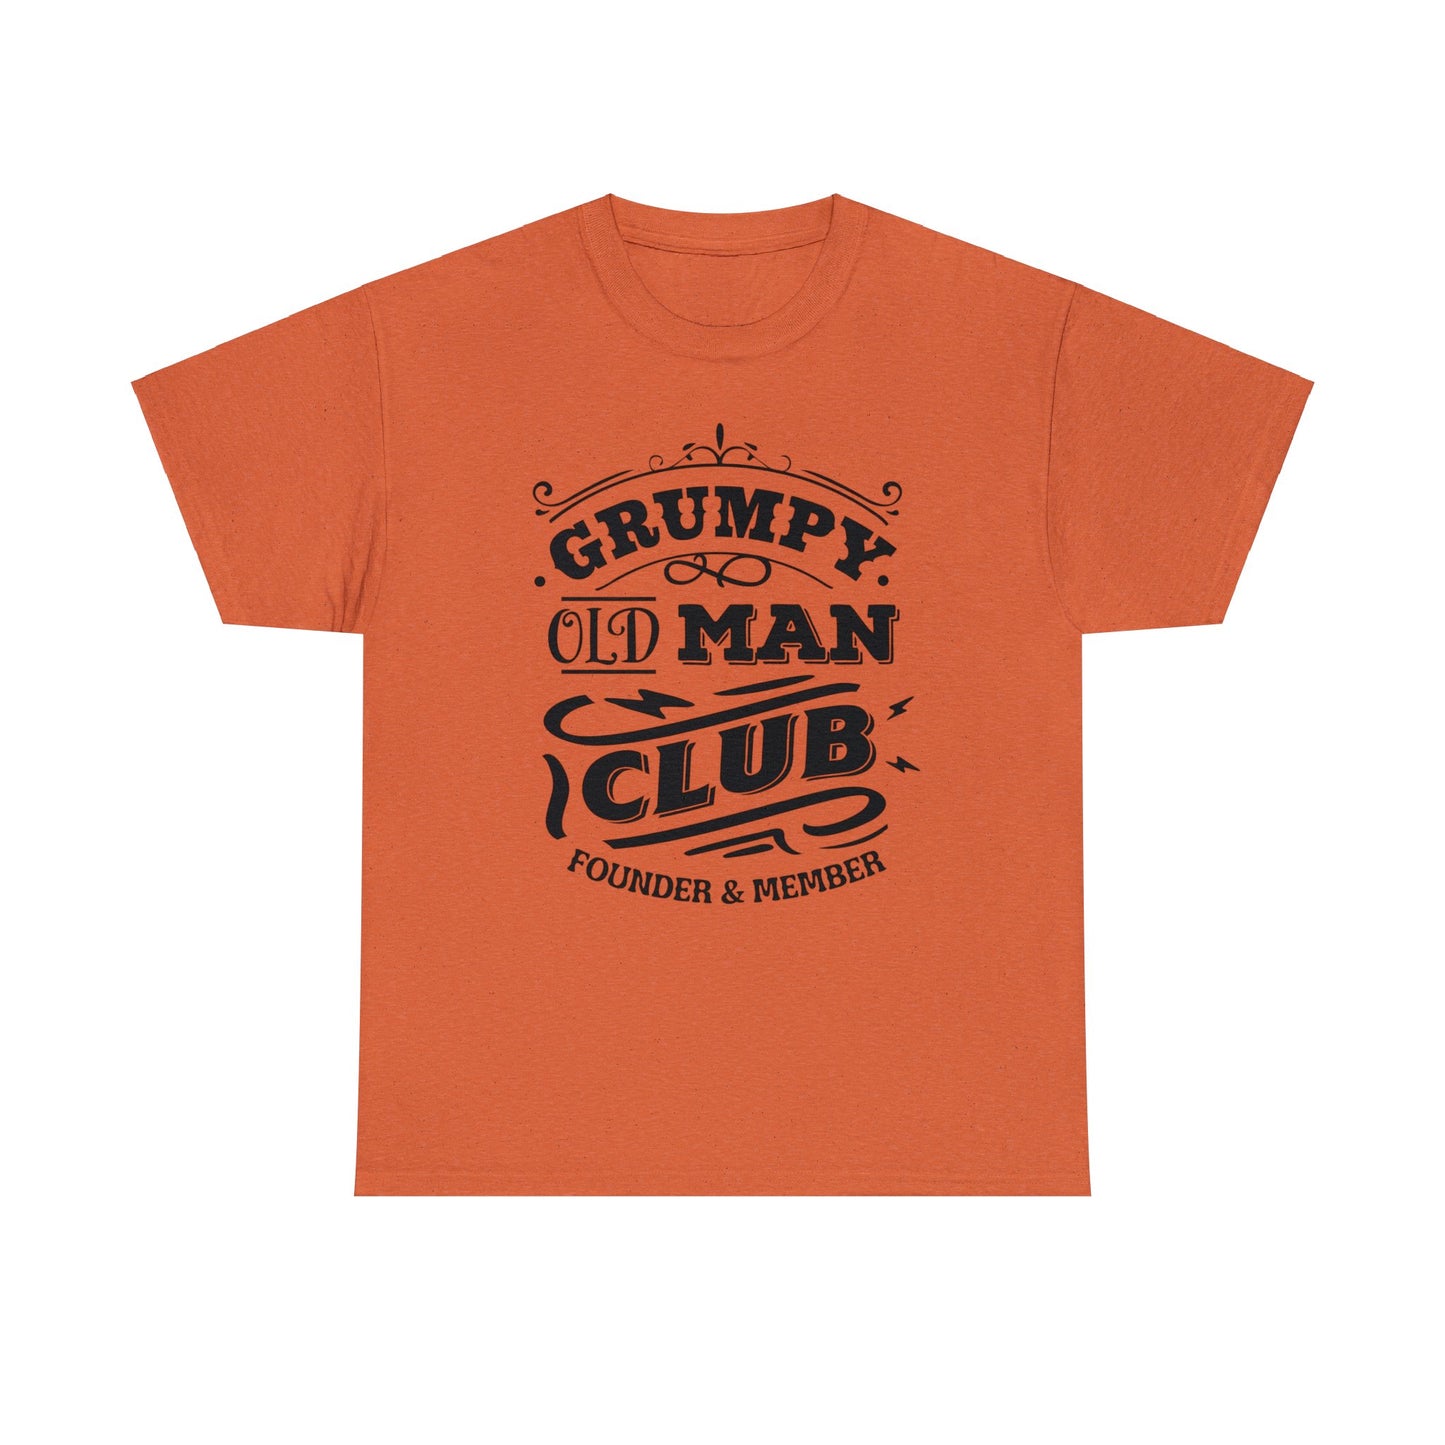 Grumpy Old Man T-Shirt For Dad T Shirt For Father's Day TShirt Gift Idea For Him